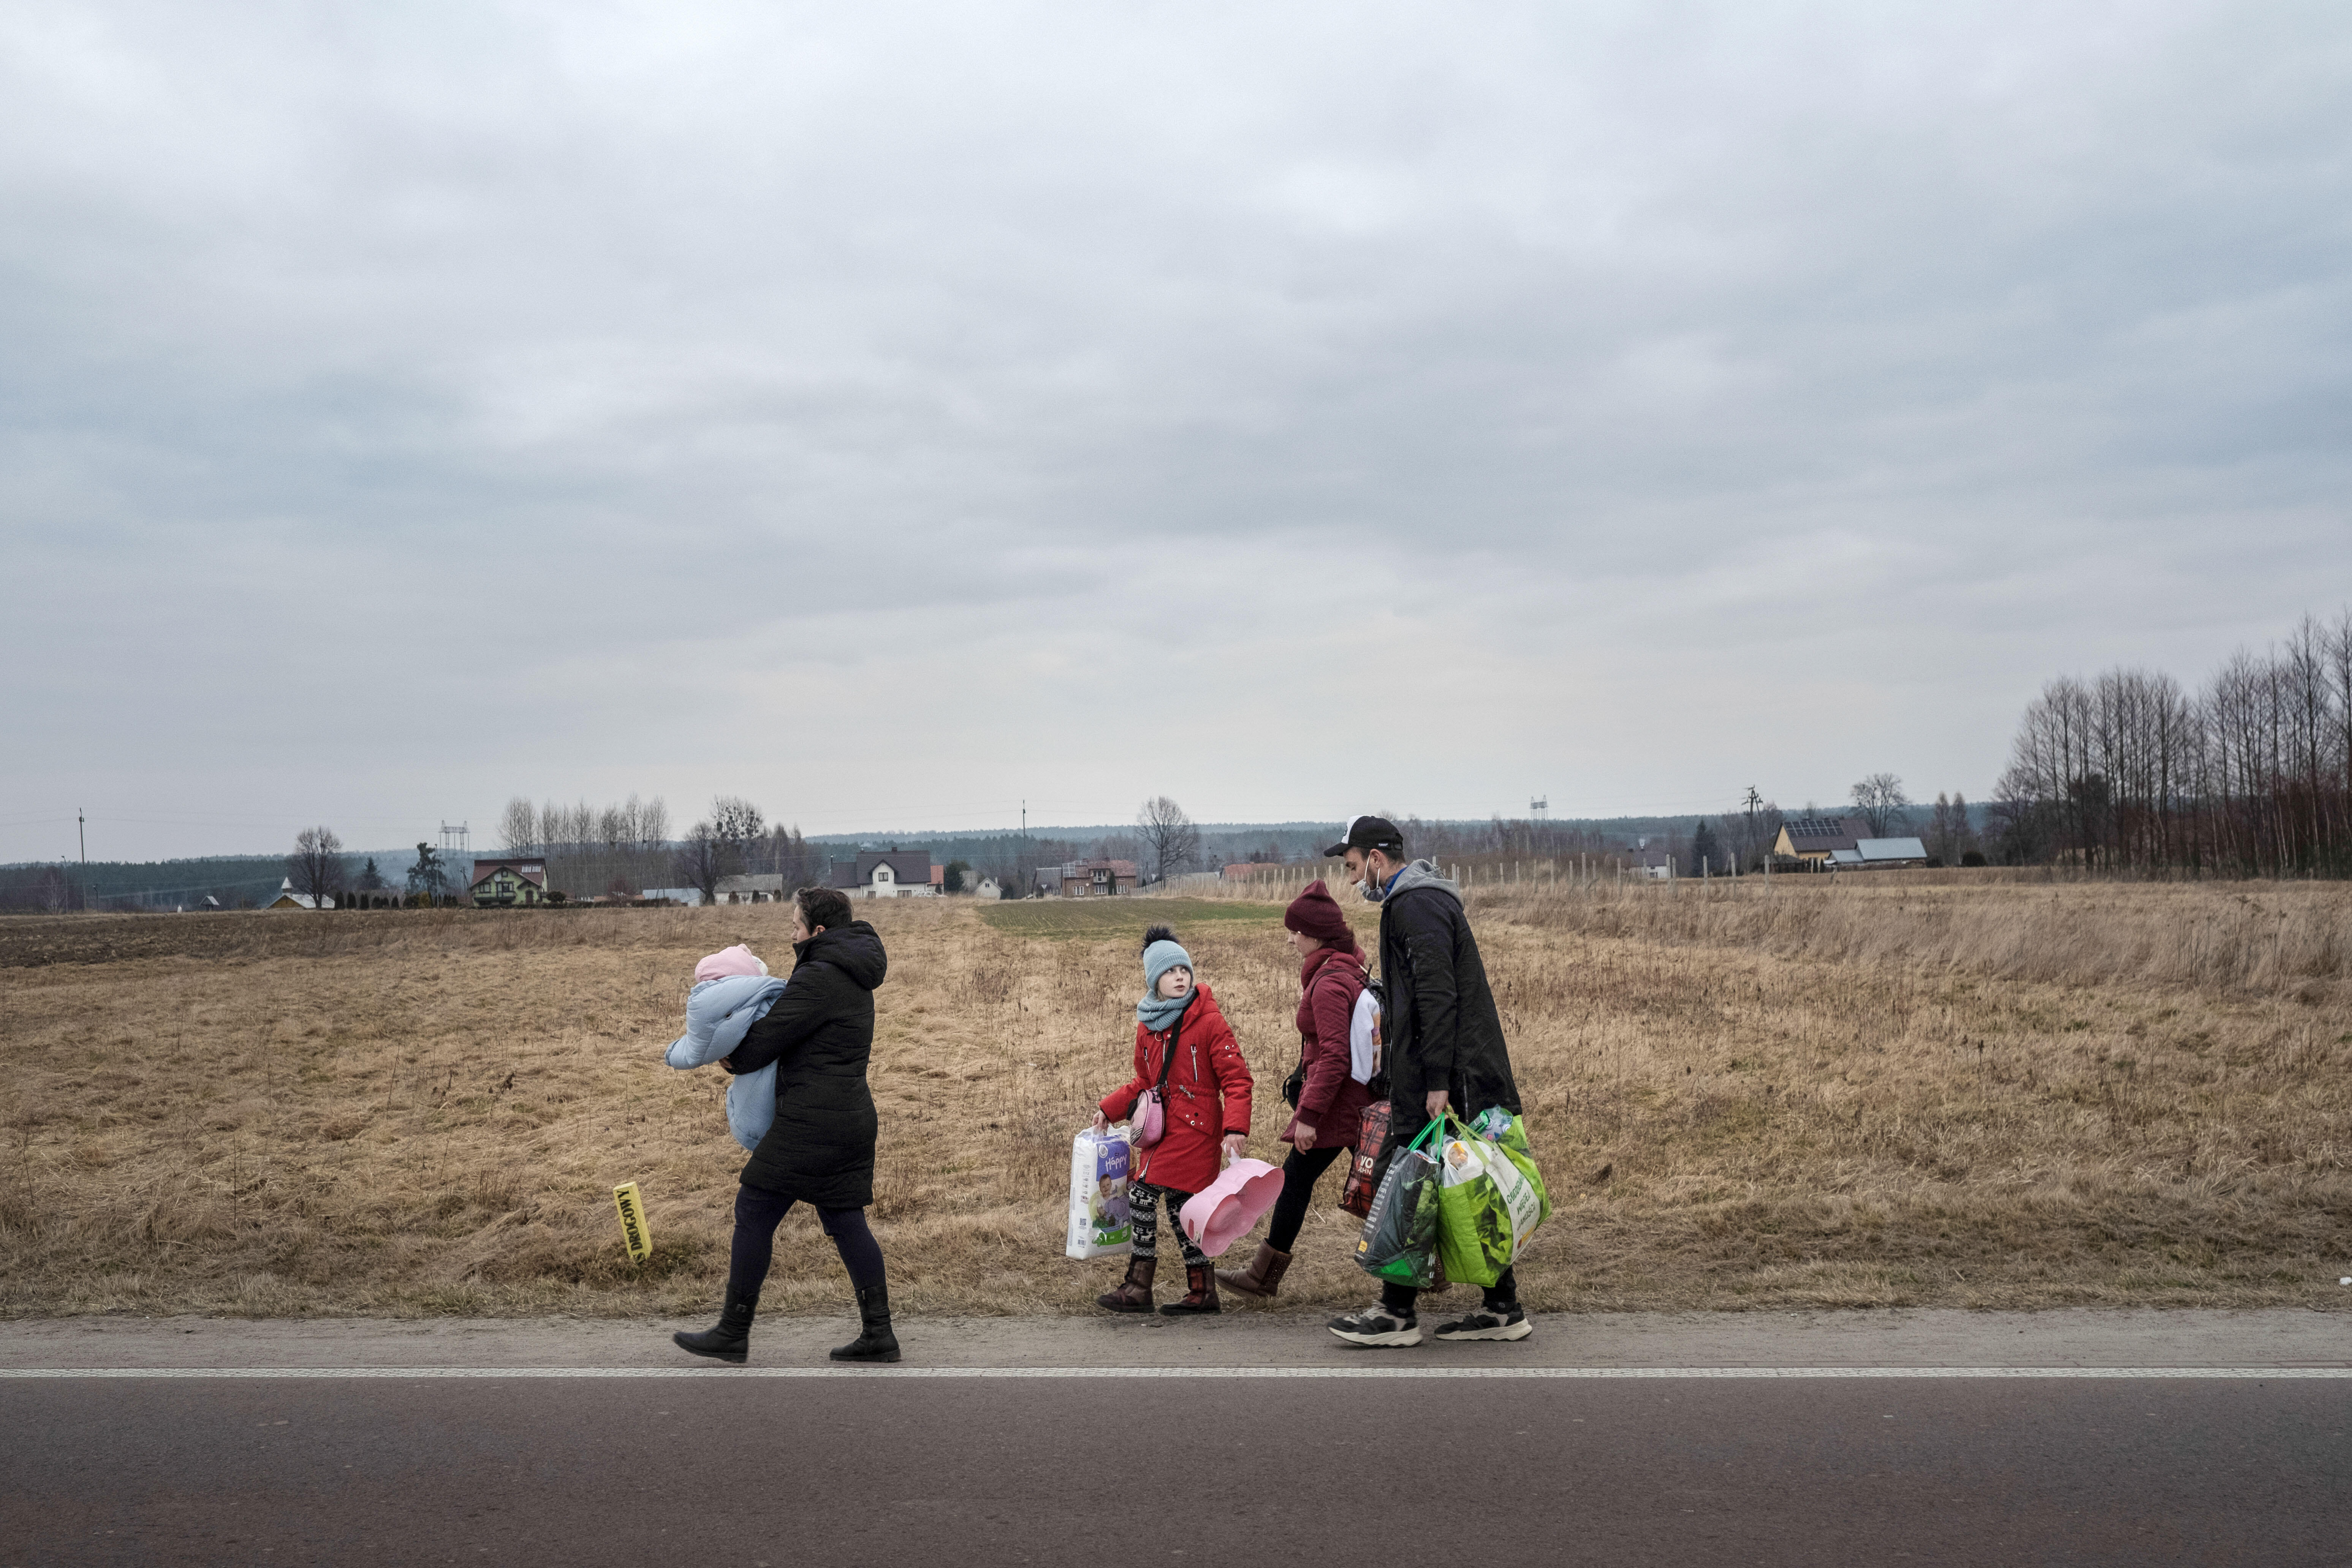 Landscape shot of a family walking down a road carrying bags. There are two adults and two children. 